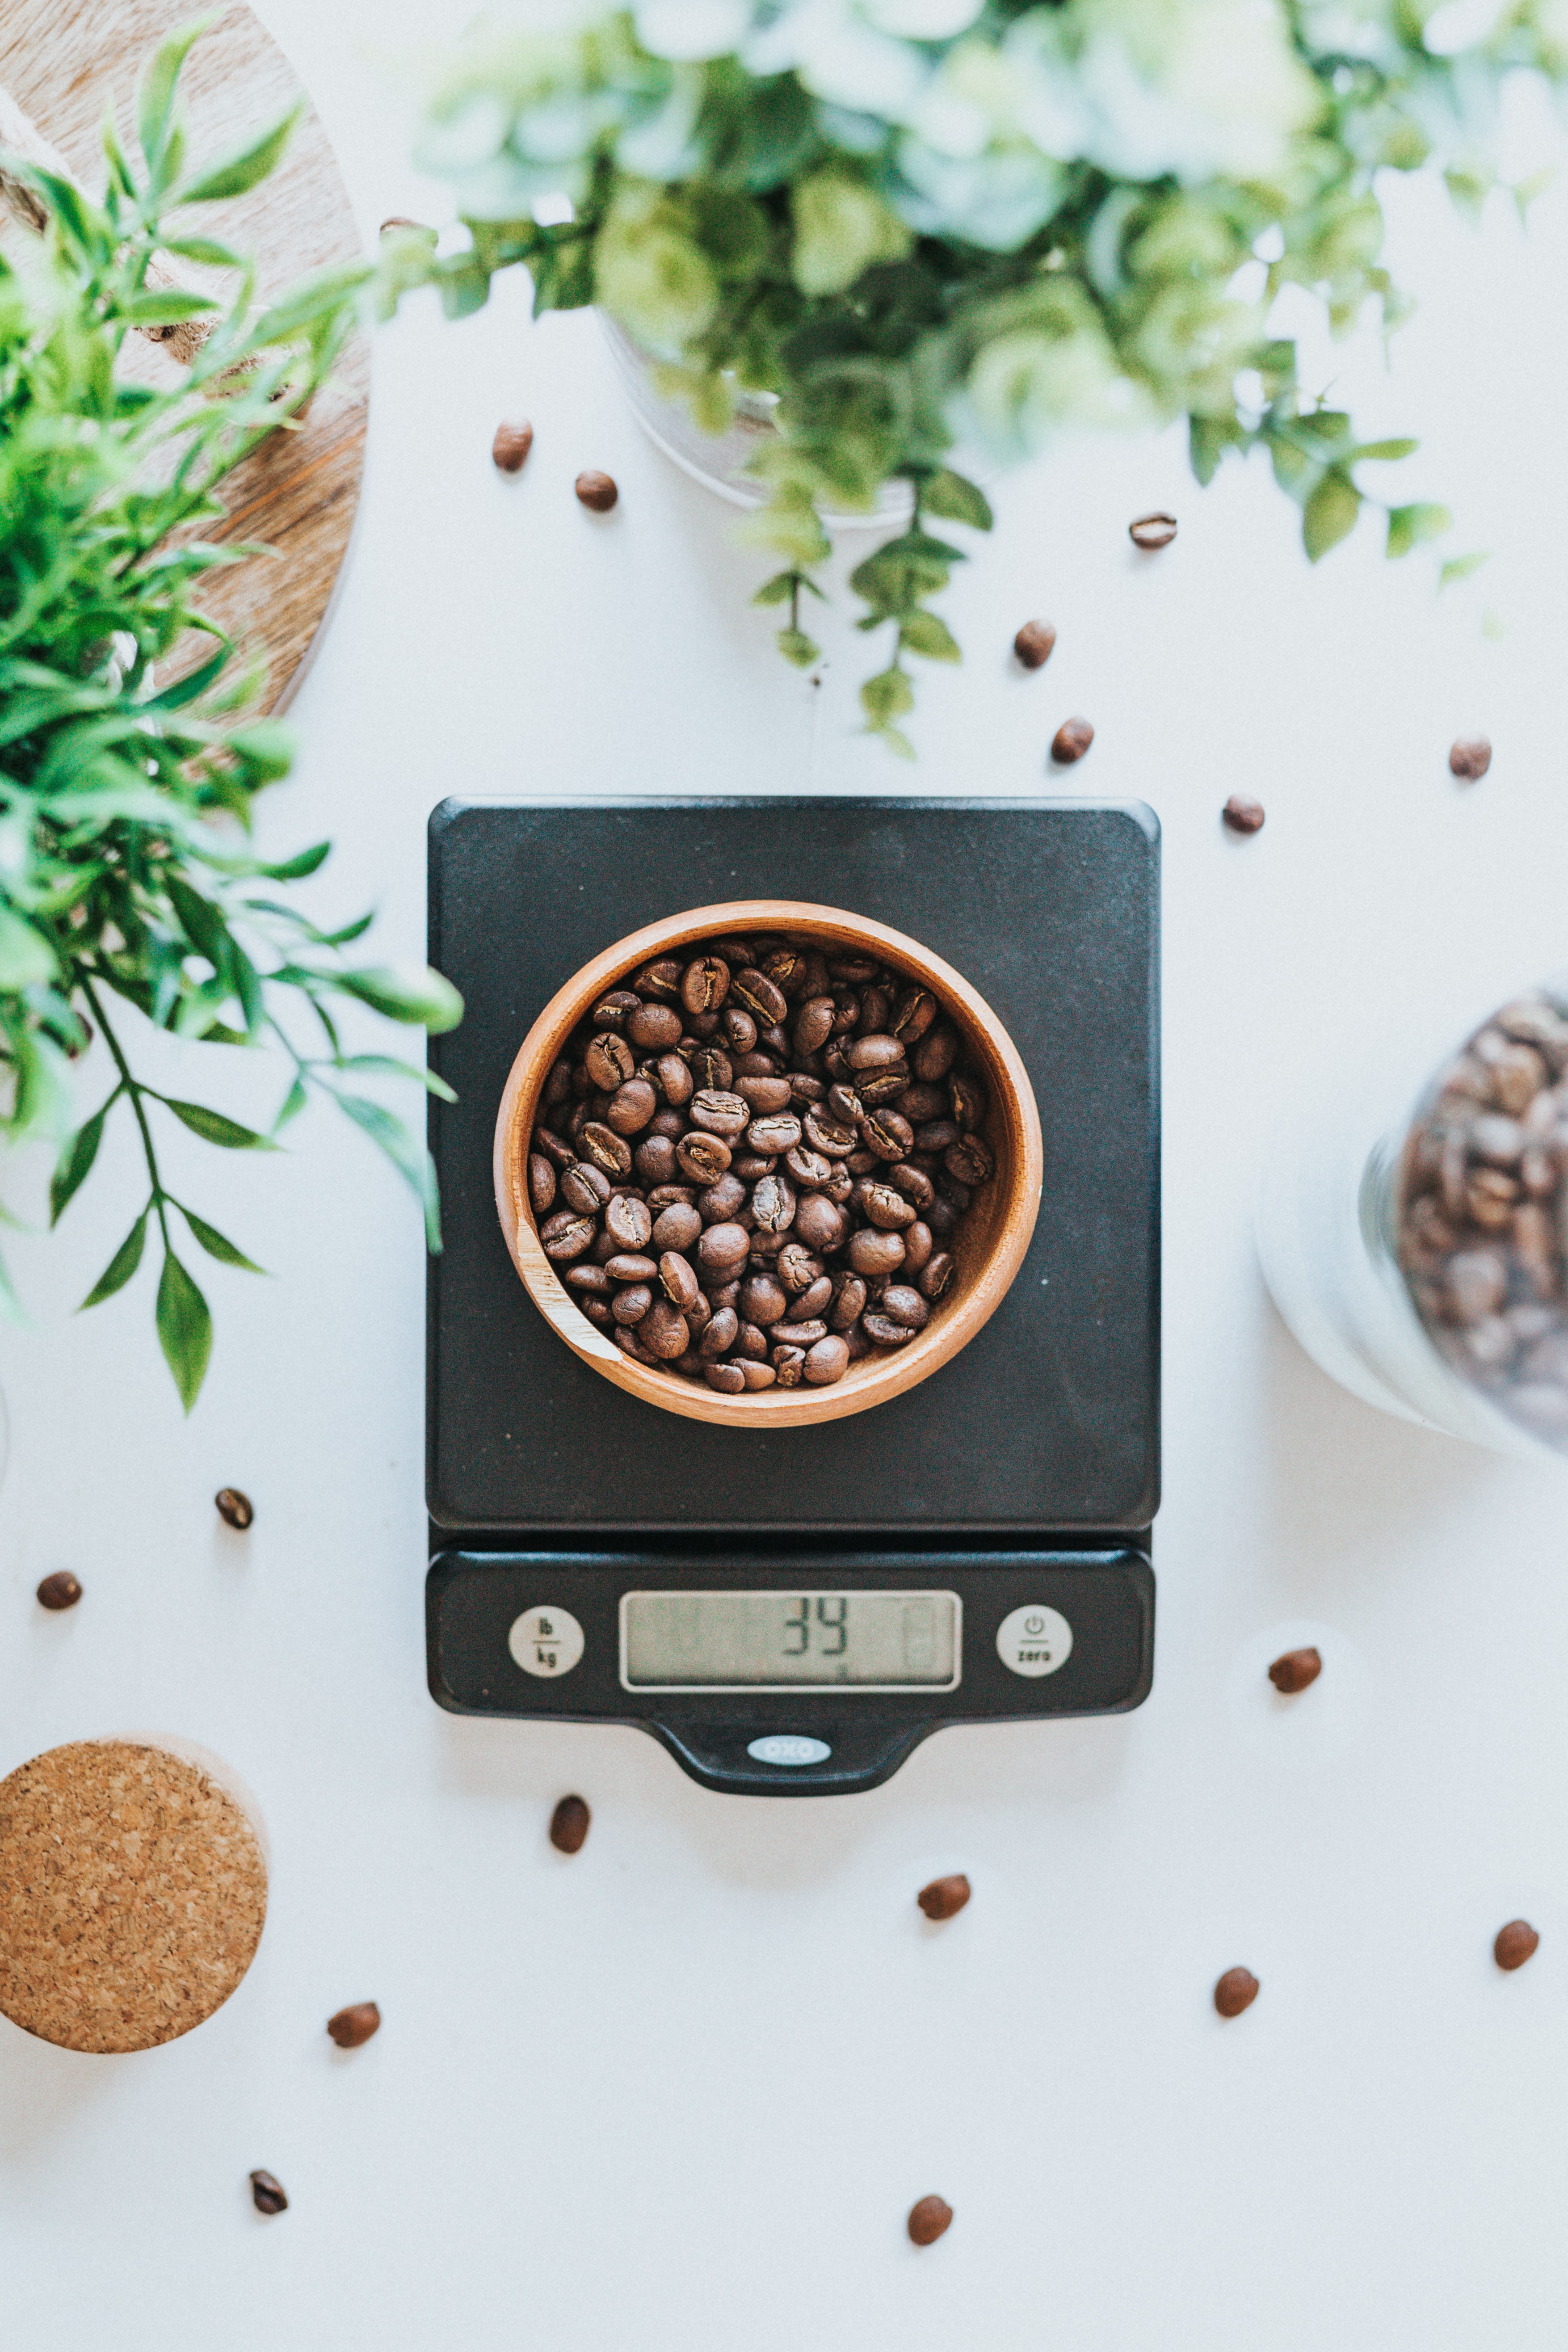 Bowl filled with coffee beans on black digital scale at 39 grams; image by Tyler Nix, via Unsplash.com.